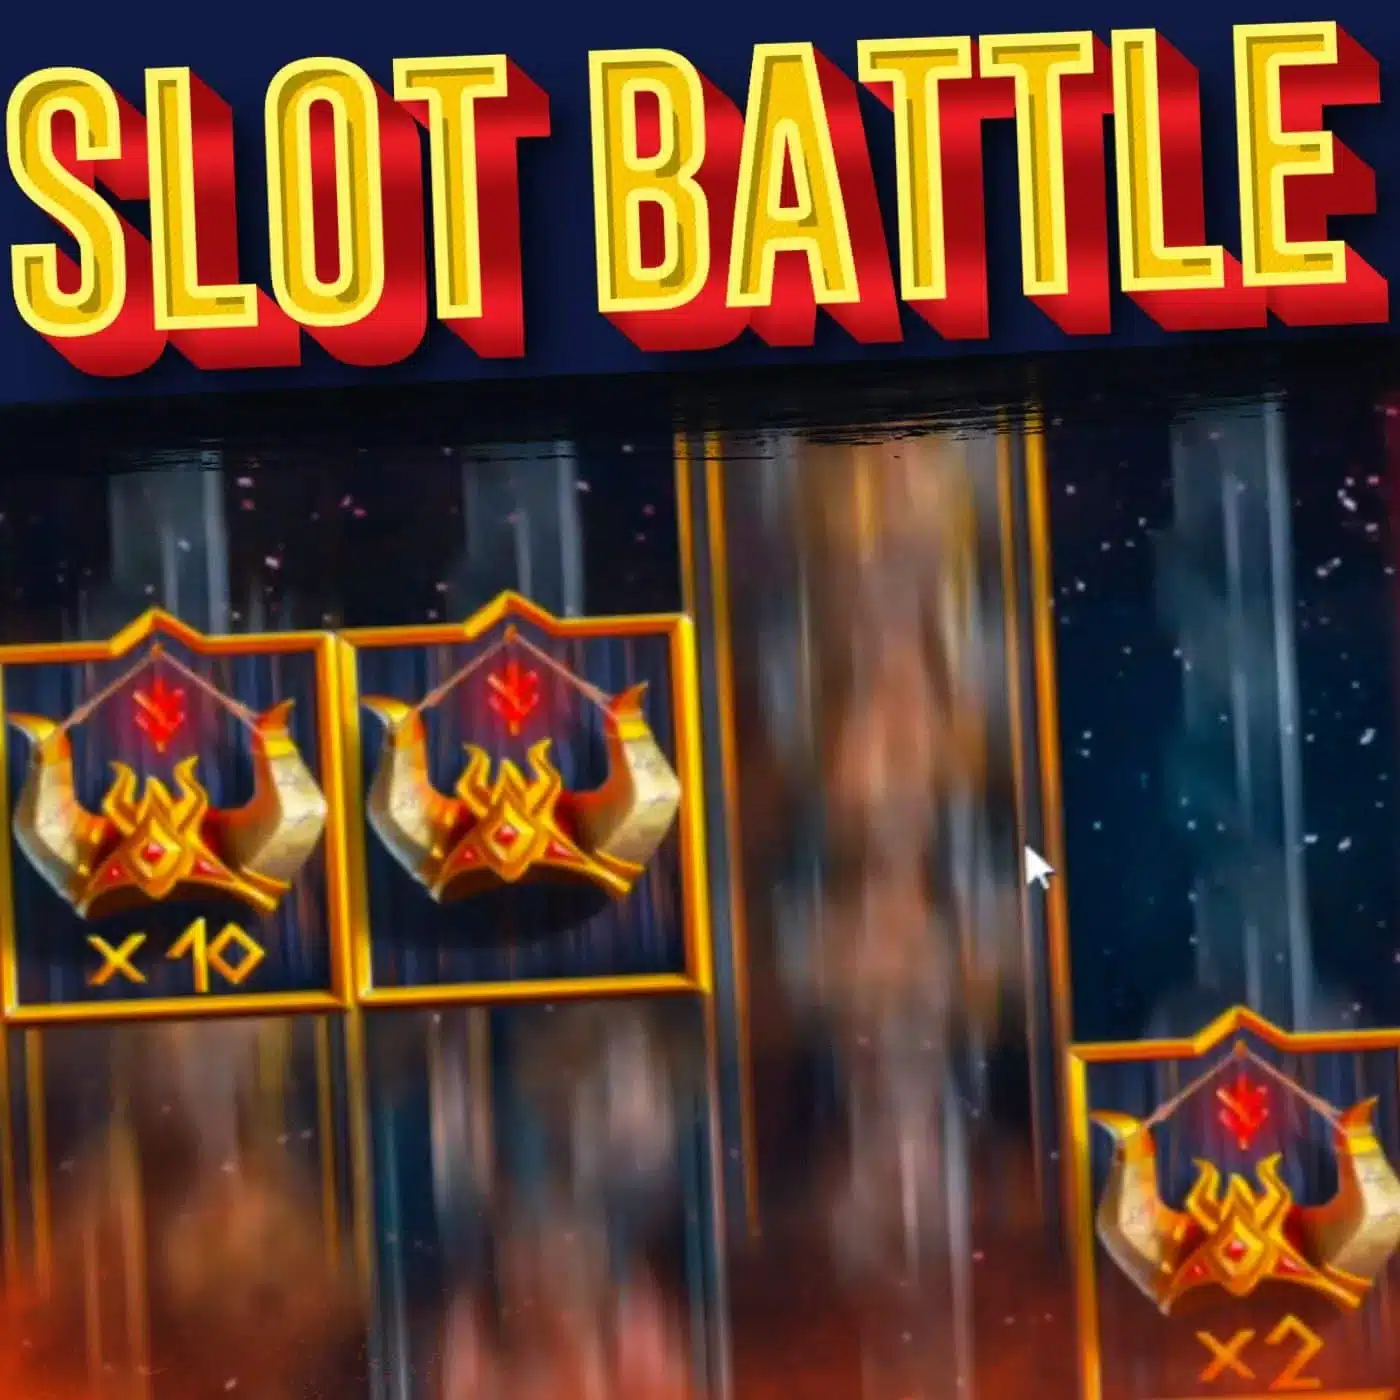 Sunday Slot Battle Provider Special! – Peter & Sons!